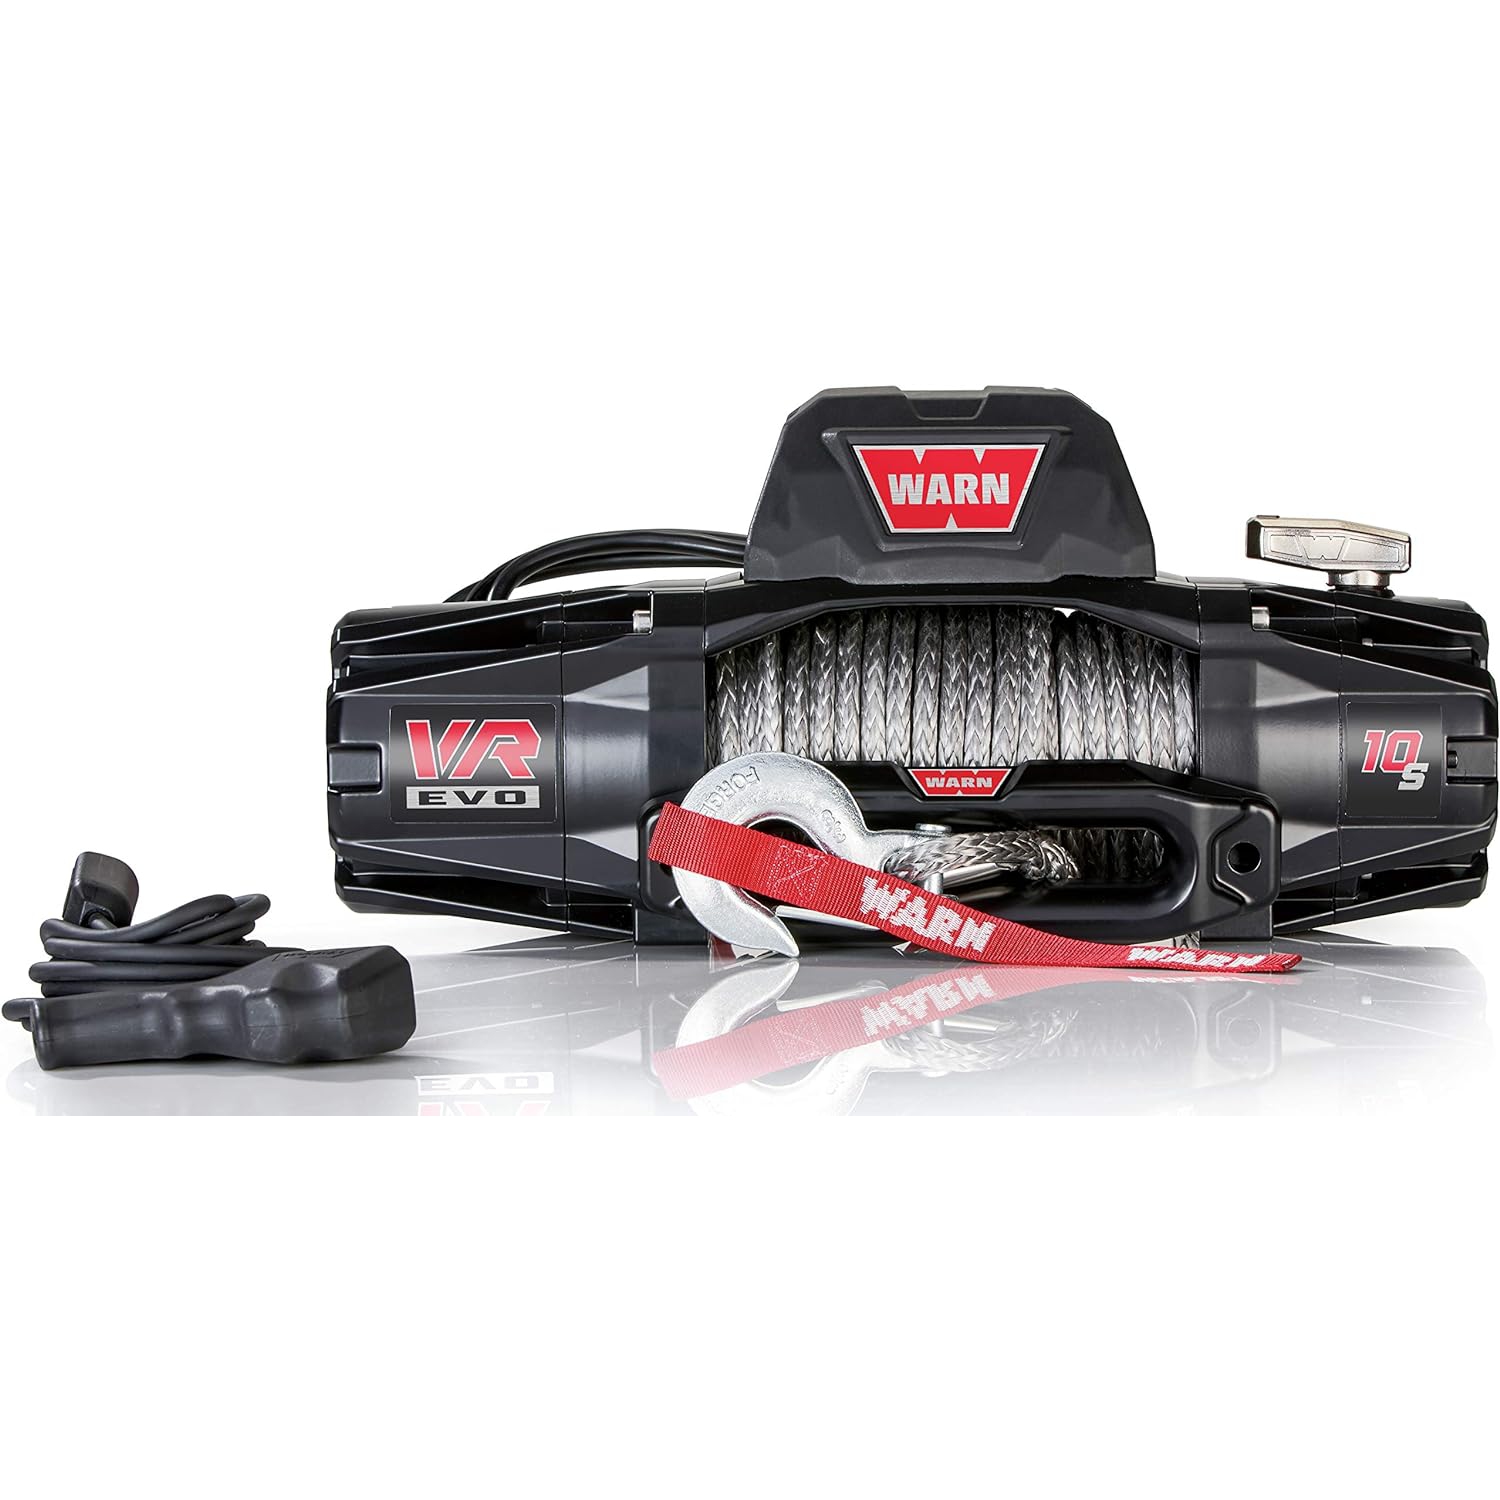 WARN 103253 VR EVO 10-S Standard Duty Winch with Synthetic Rope - 10,000 lb. Capacity